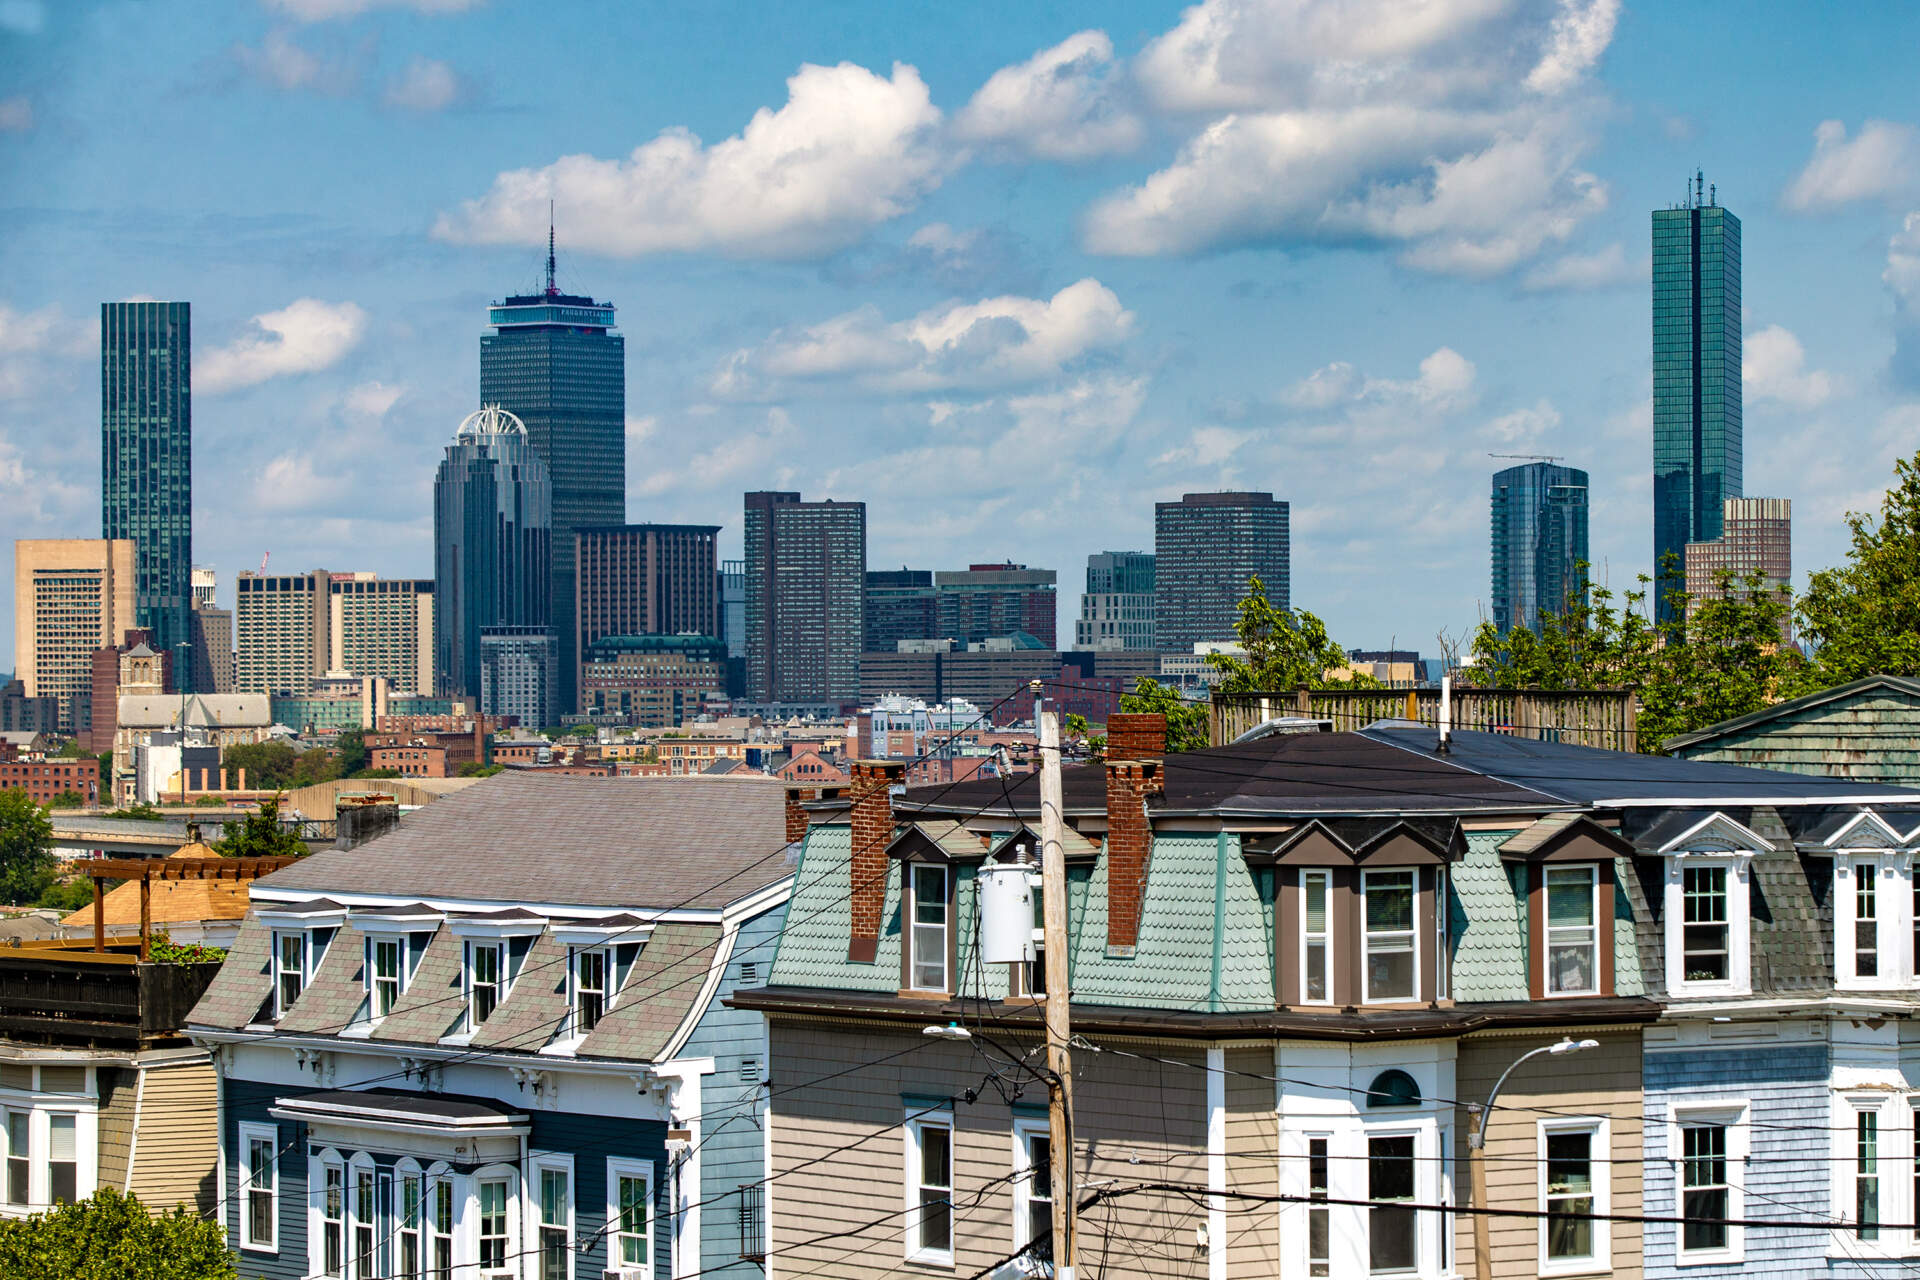 The view of the Boston skyline from Dorchester Heights in South Boston. (Jesse Costa/WBUR)